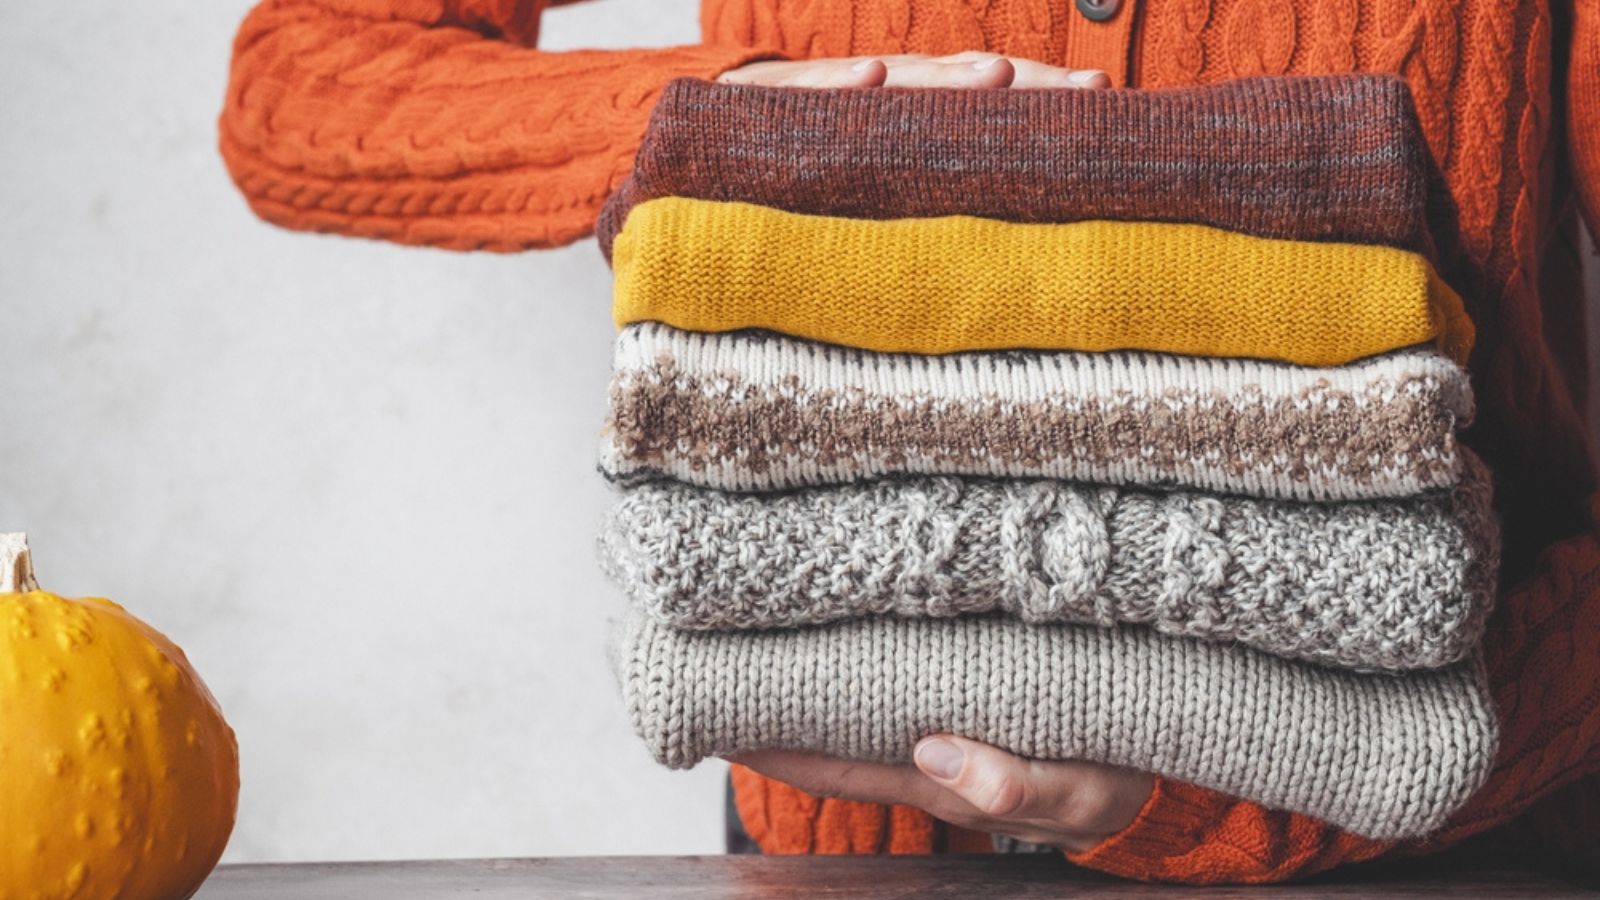 Best 25+ Deals for A Striped Sweater